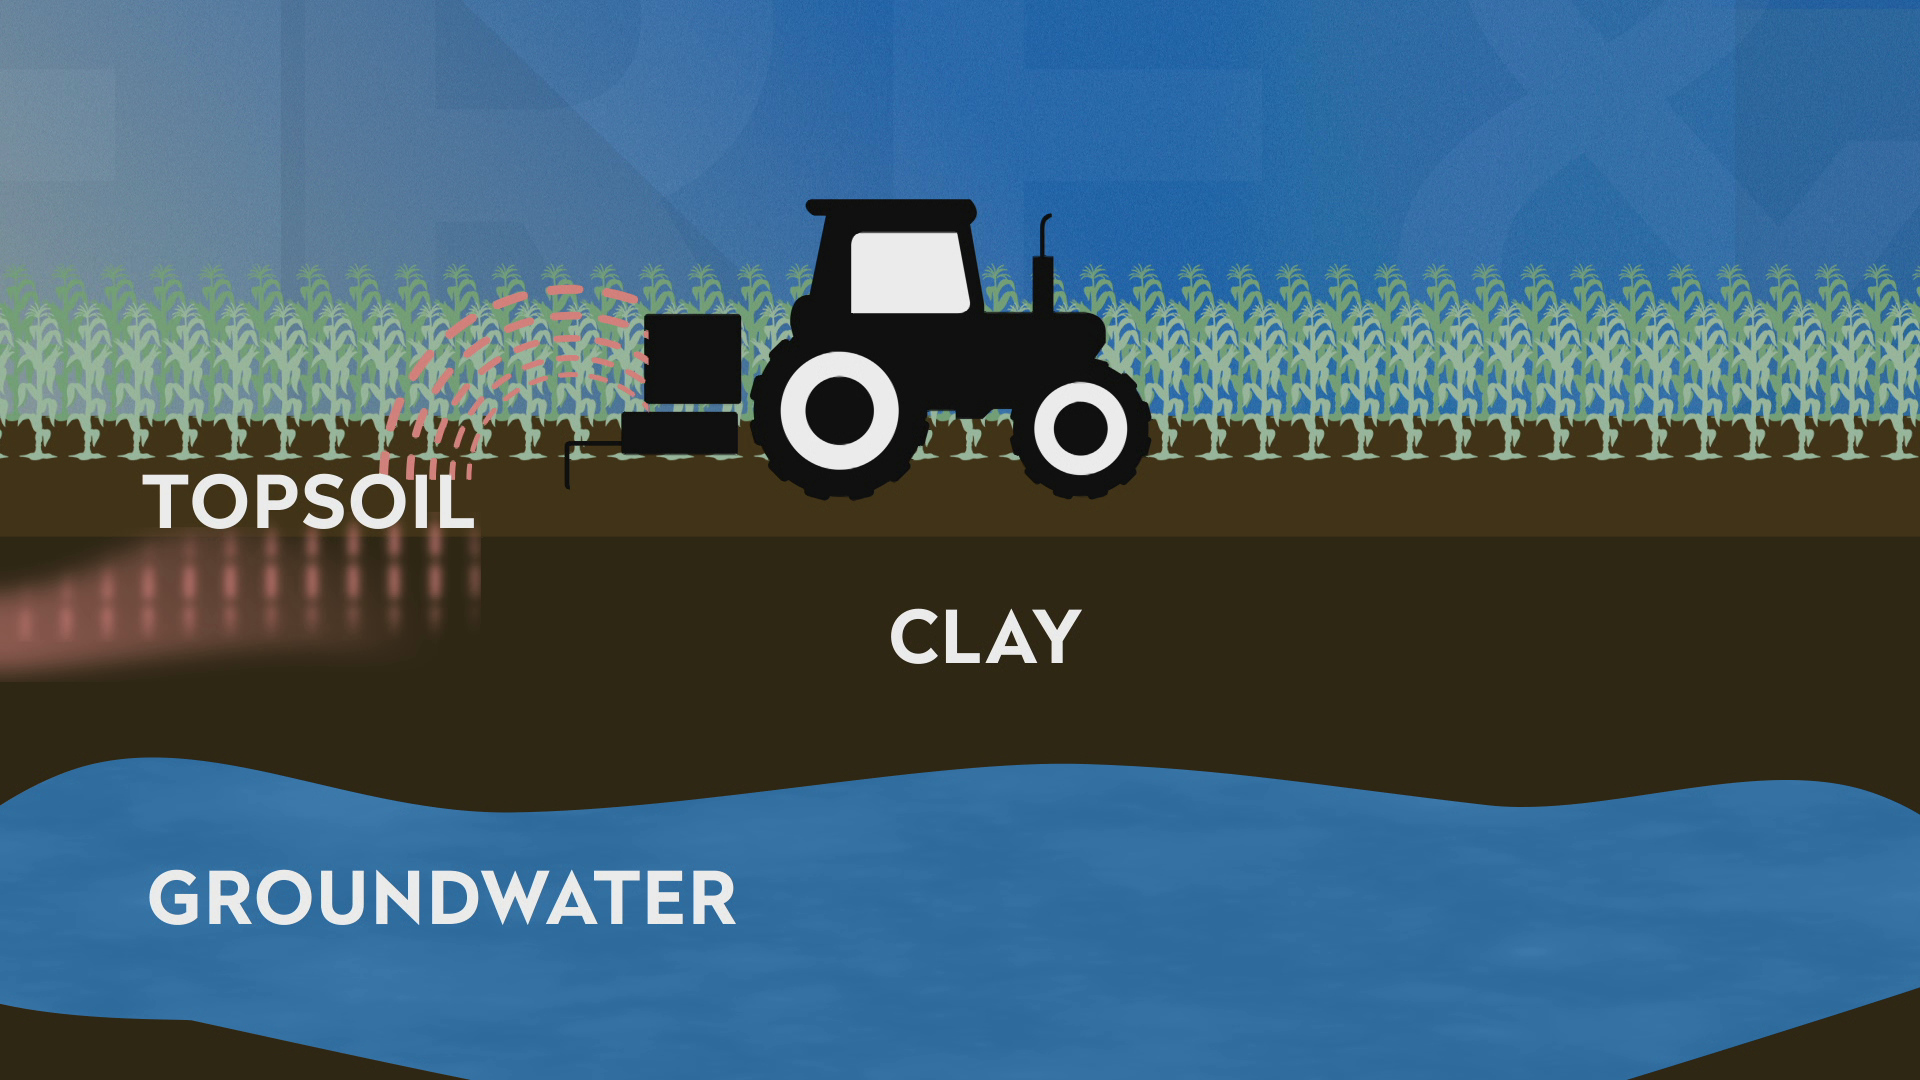 An illustration shows a stylized tractor on a corn field with a stratified view showing how nitrate relates to layers of topsoil, clay and groundwater — there is no nitrate in the groundwater.